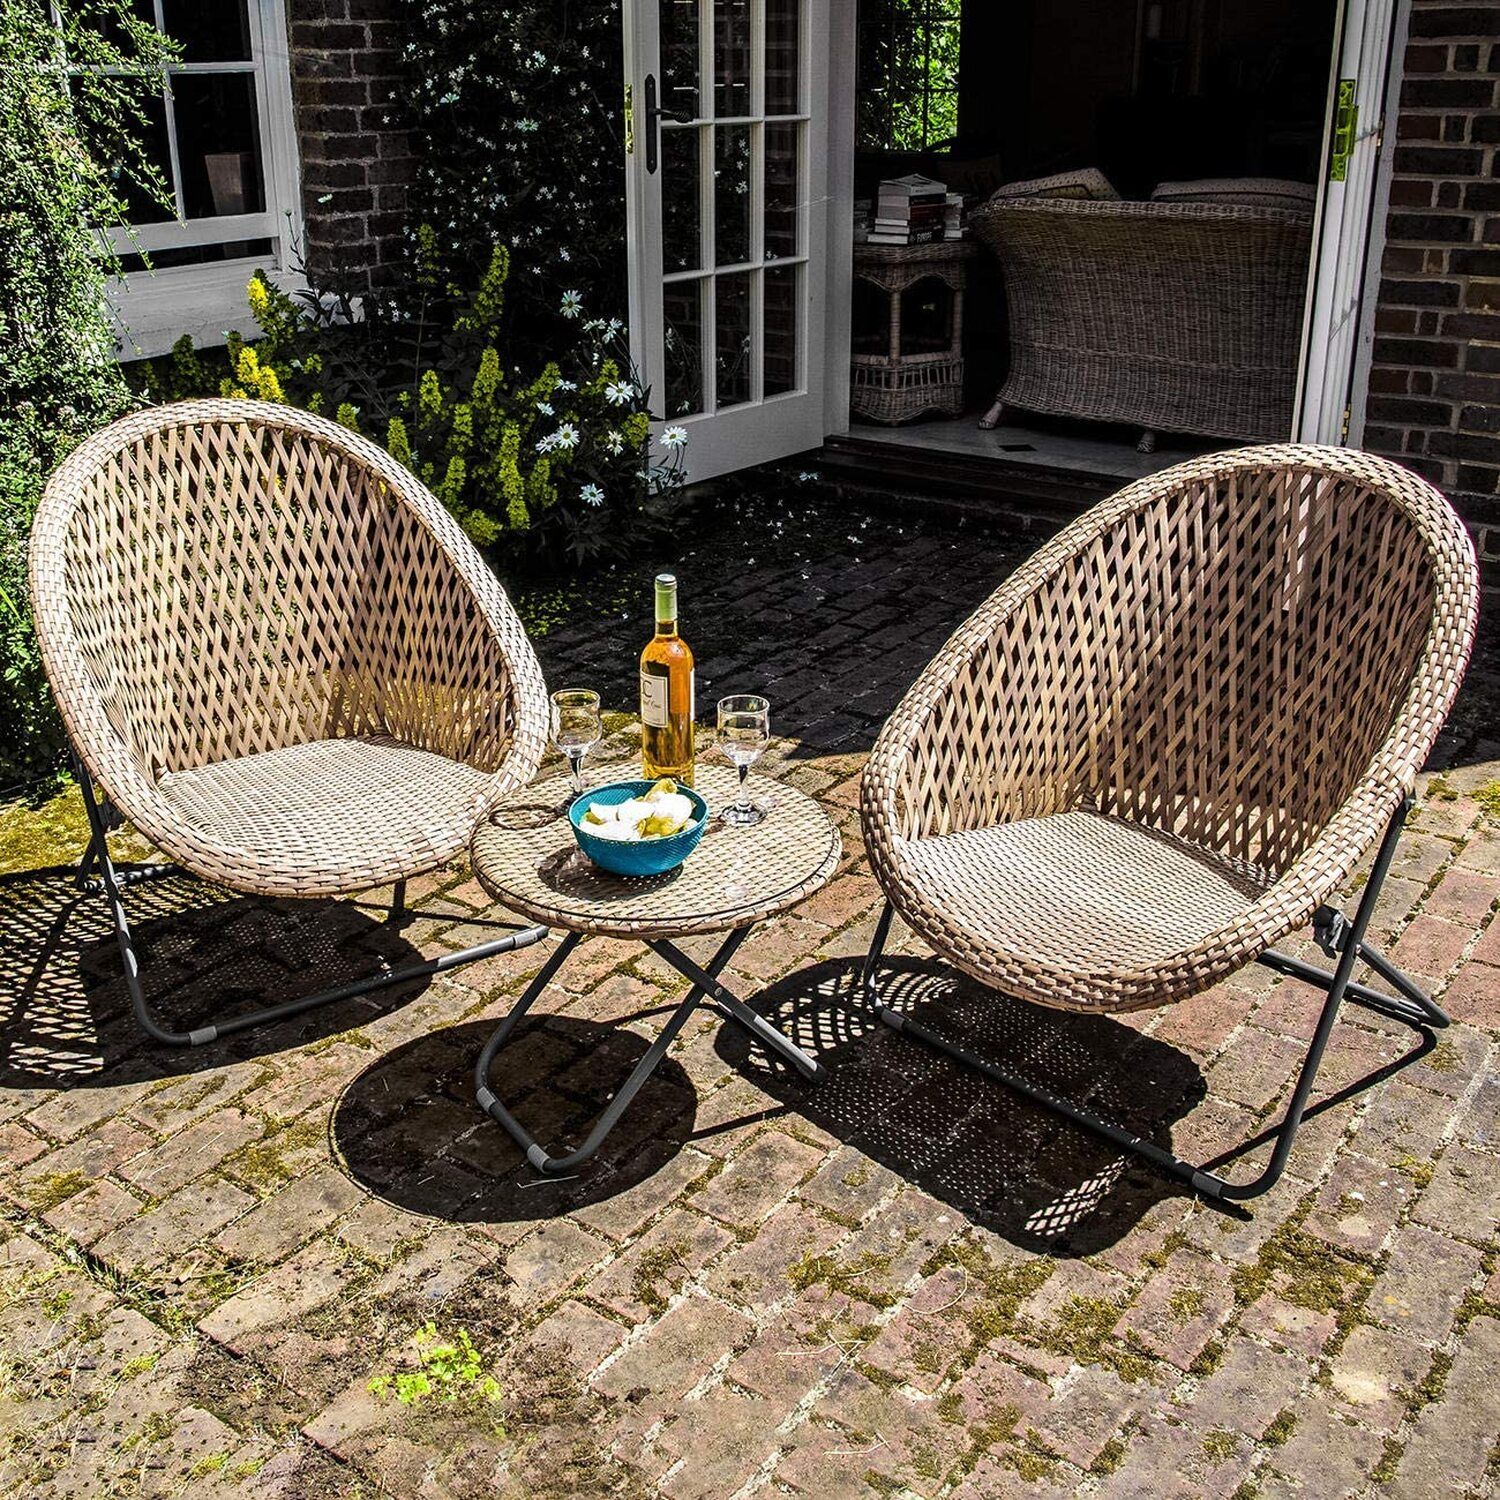 Discover the perfect garden bistro set for your outdoor space